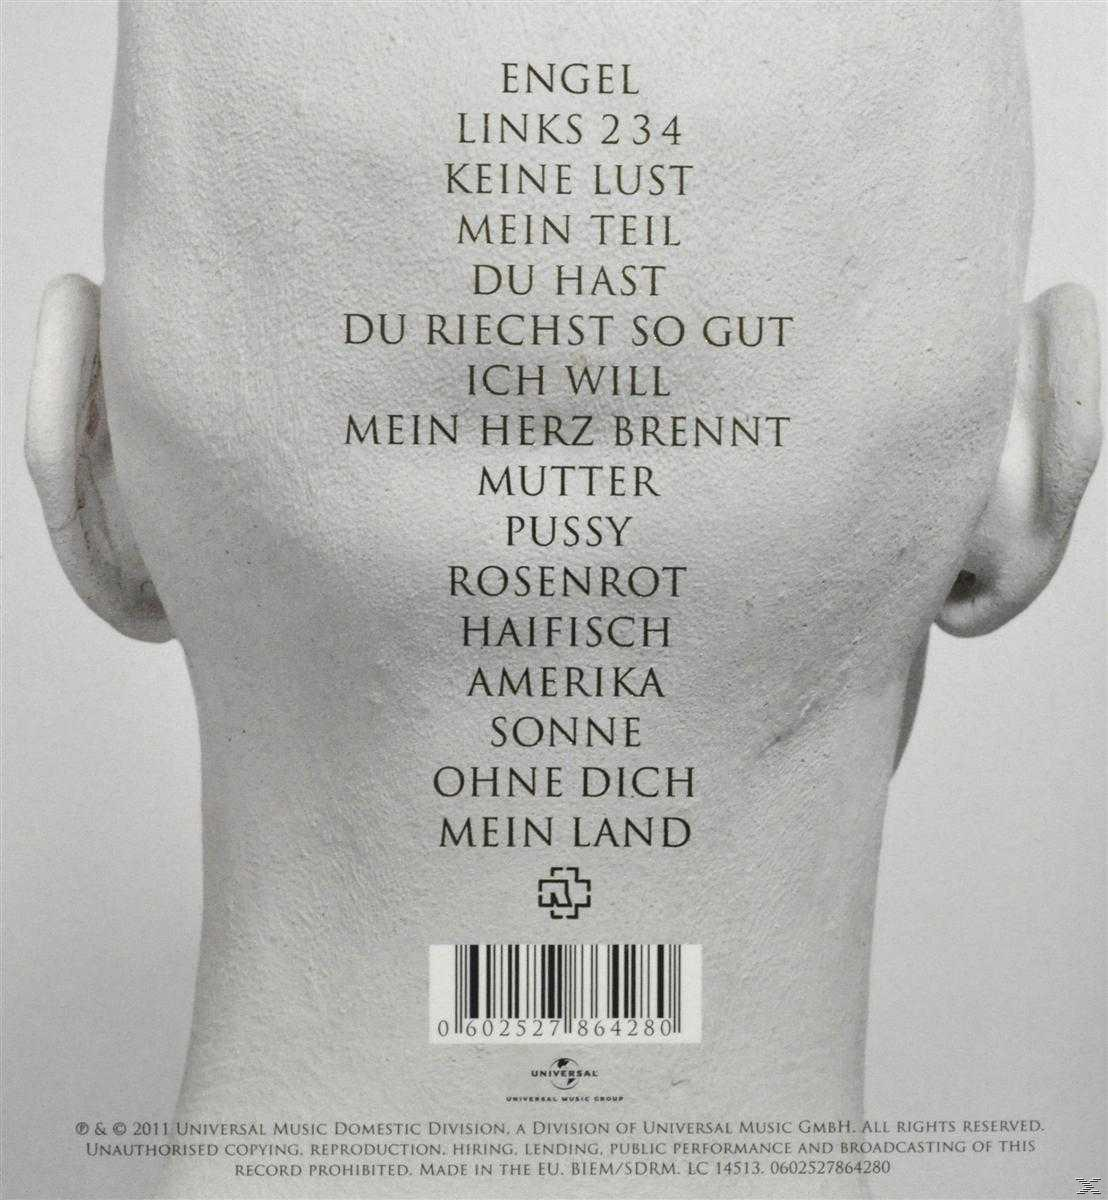 Germany (CD) In - Rammstein - 1995-2011 Made